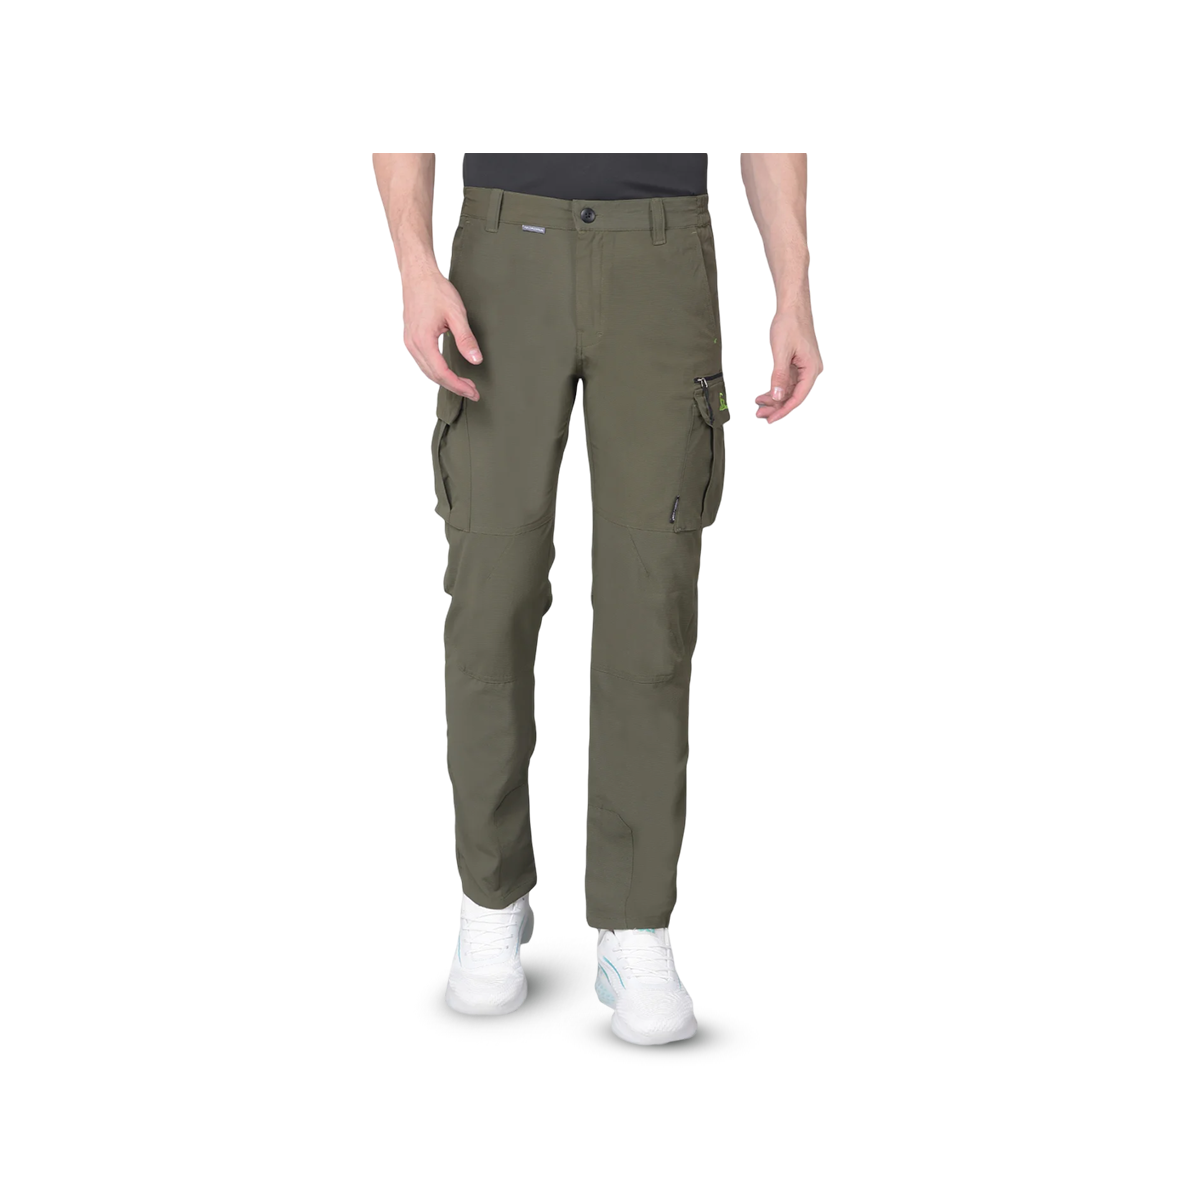 QUADRA Olive Trouser for Stylish Comfort on the Go - Small